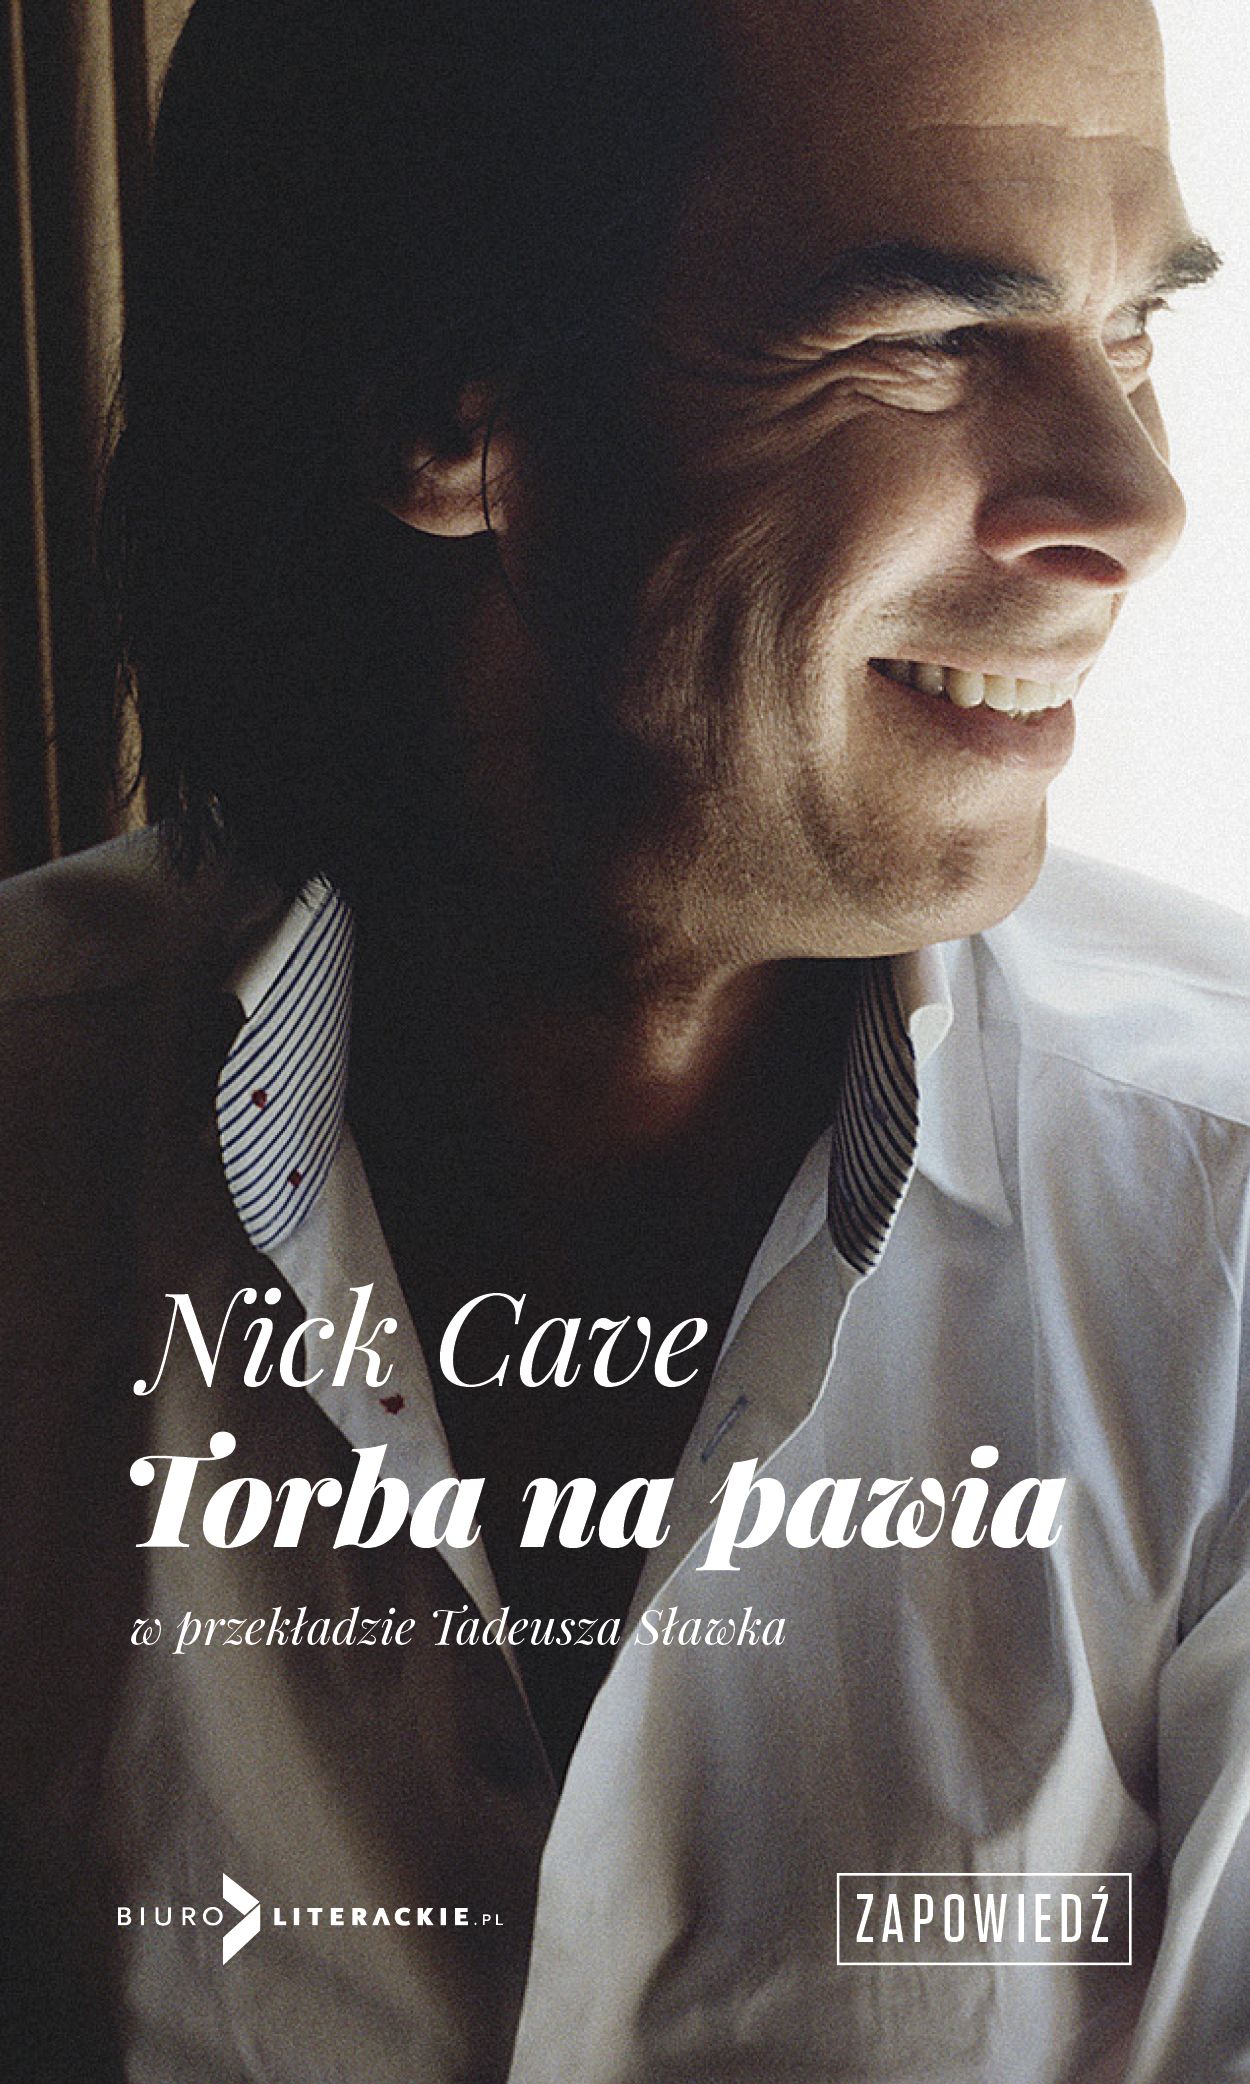 "Torby na pawia",  Nick Cave